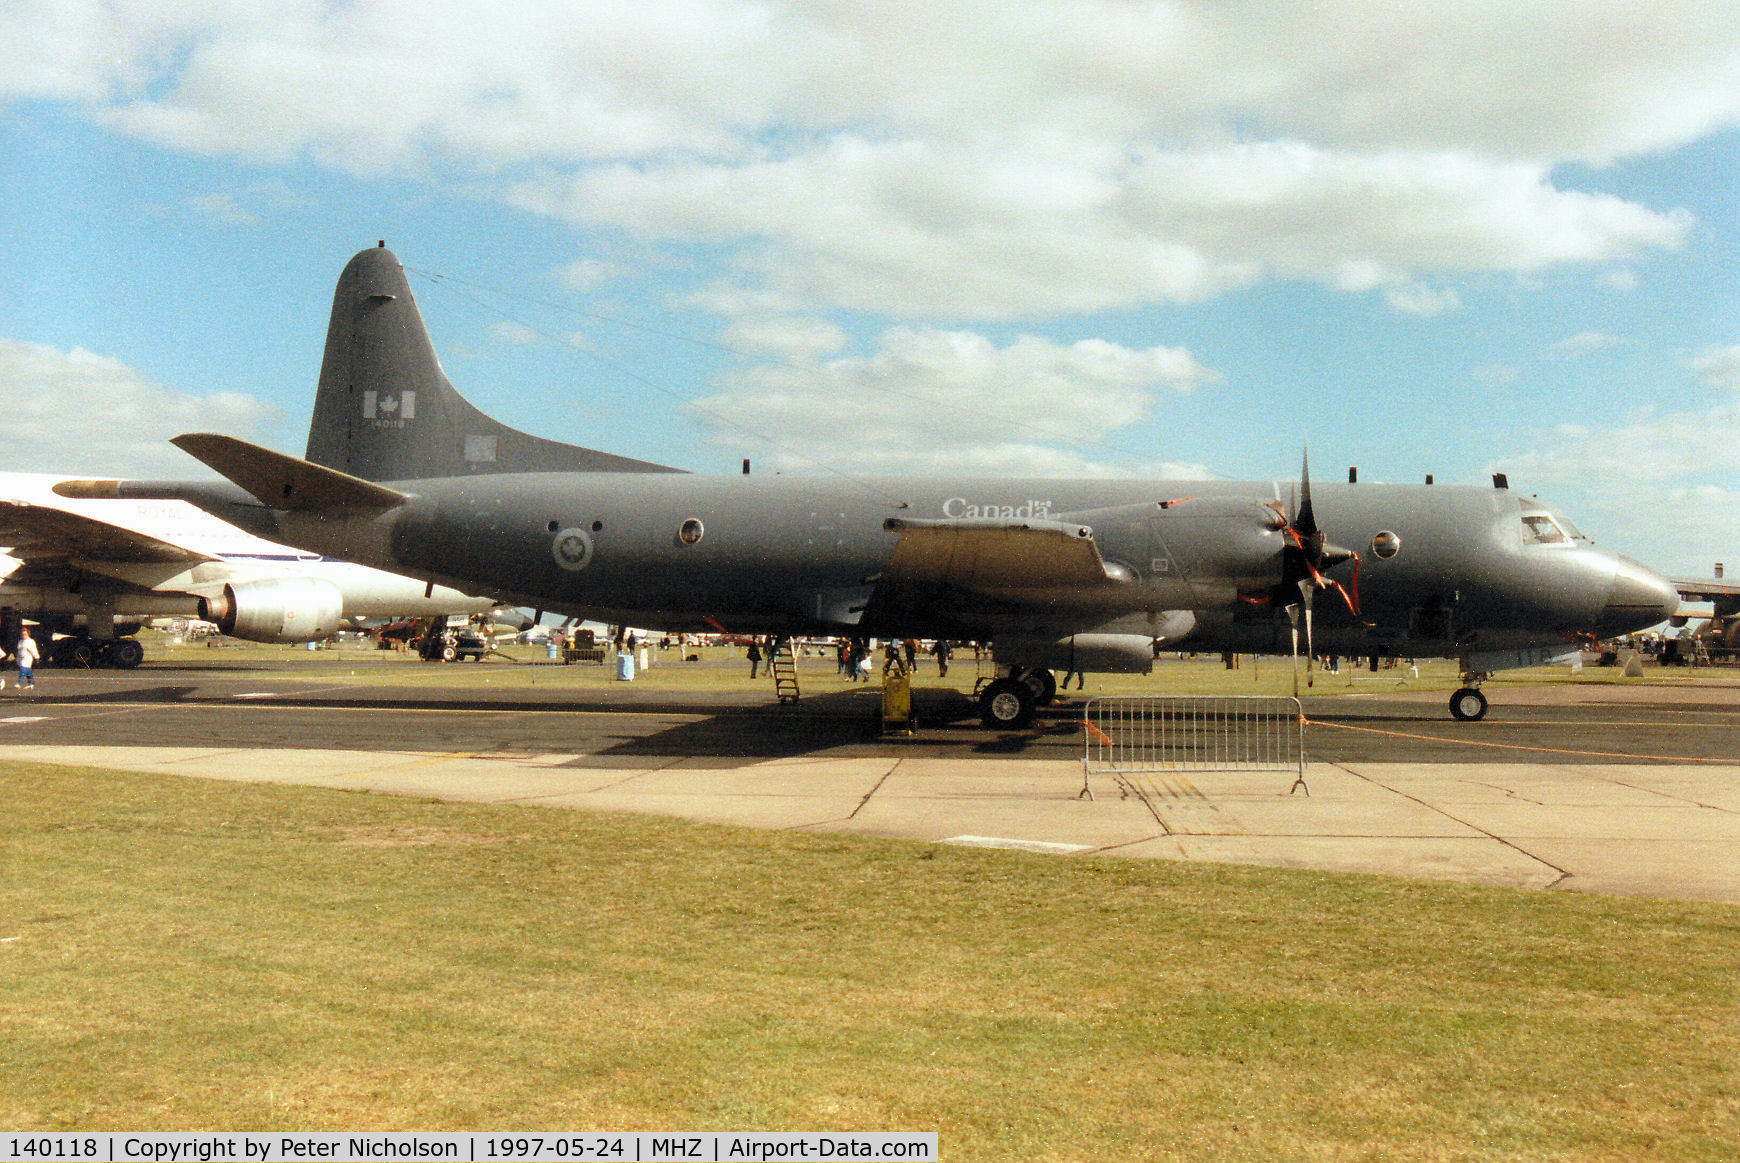 140118, 1981 Lockheed CP-140 Aurora C/N 285B-5725, CP-140 Aurora, callsign Canforce 118, of 404 Squadron Canadian Armed Forces on display at the 1997 RAF Mildenhall Air Fete.